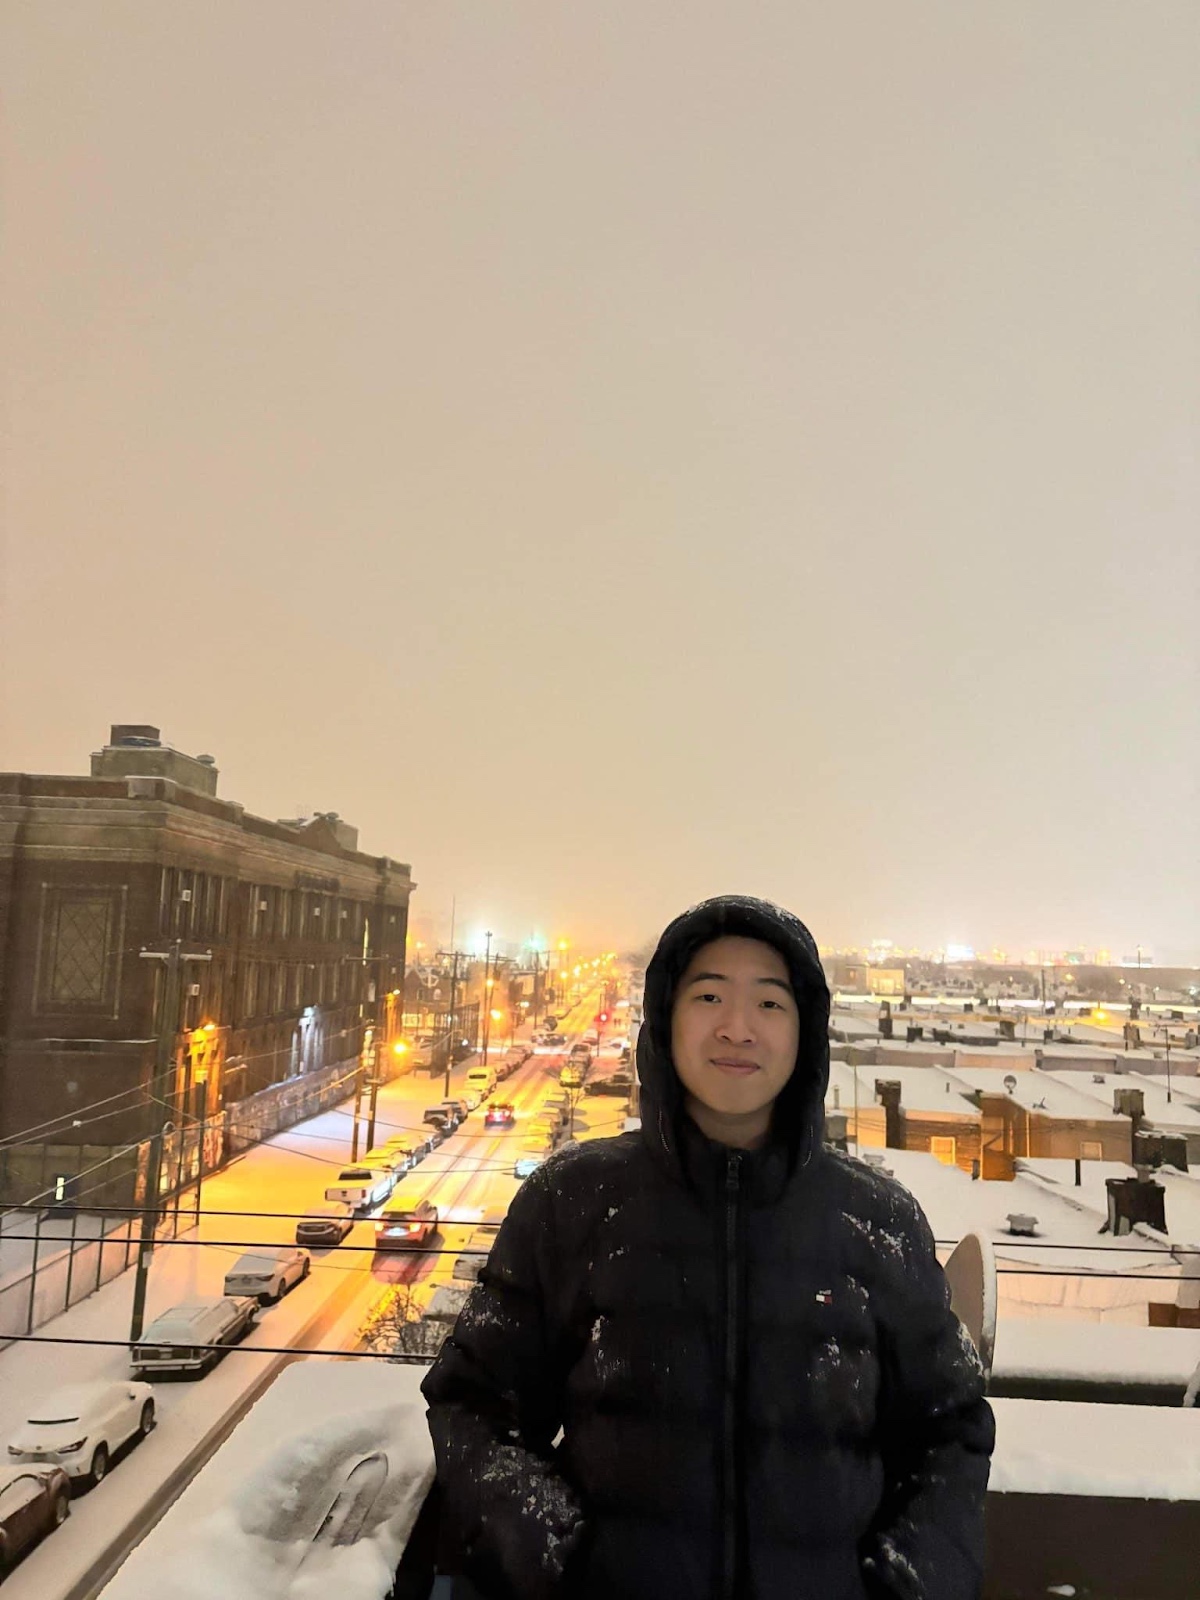 Chayhok standing outside in the snow.